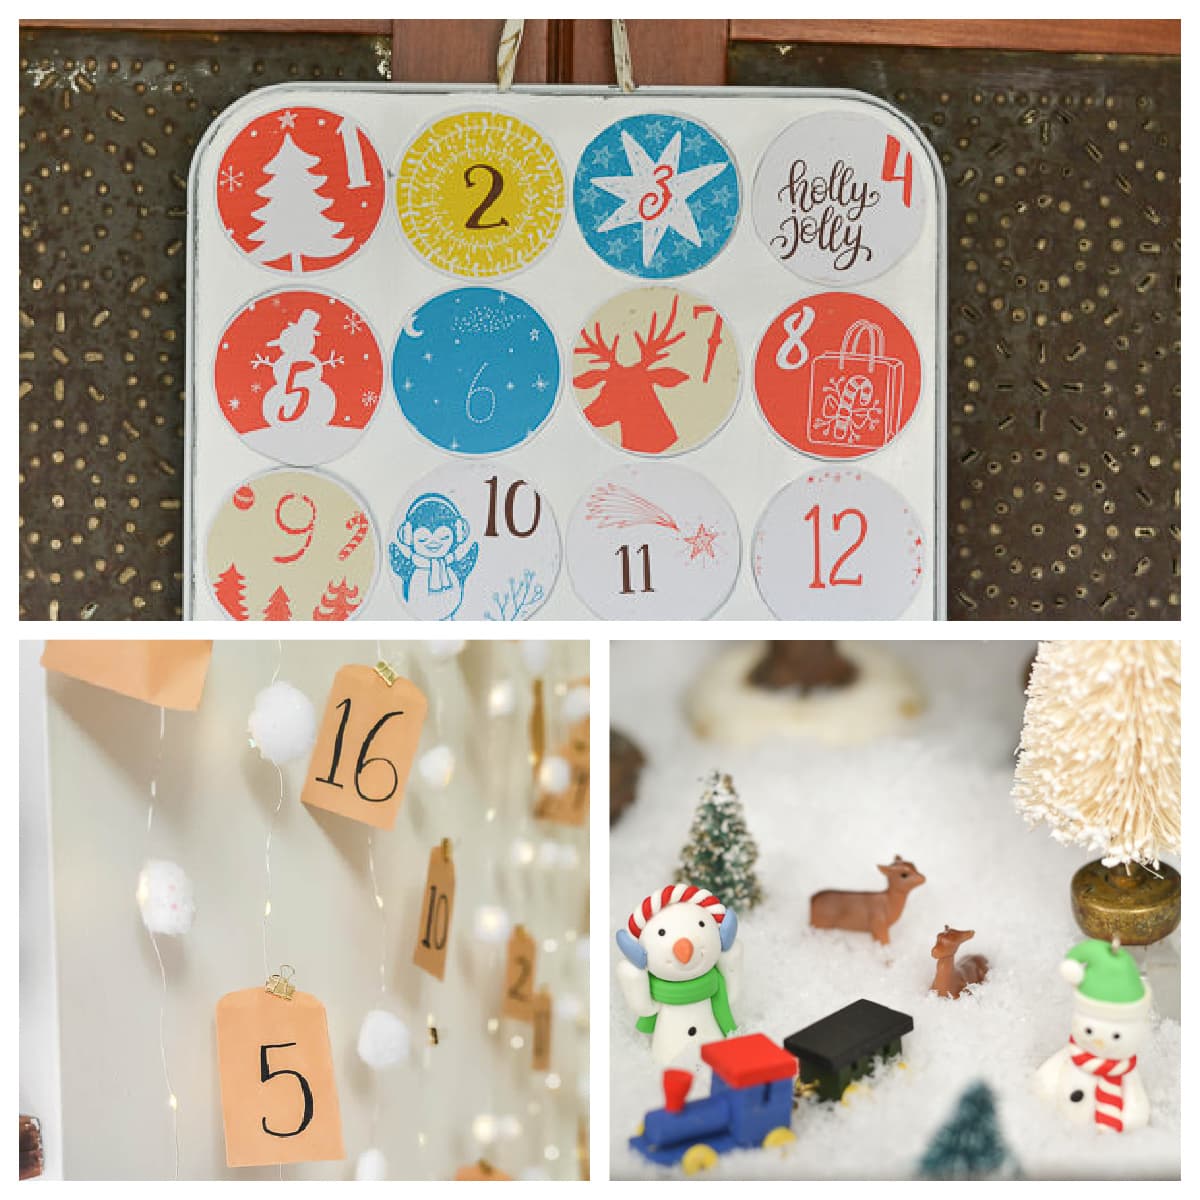 Advent Calendar Fillers, Gifts for Advent Calendars, Gifts Under 5